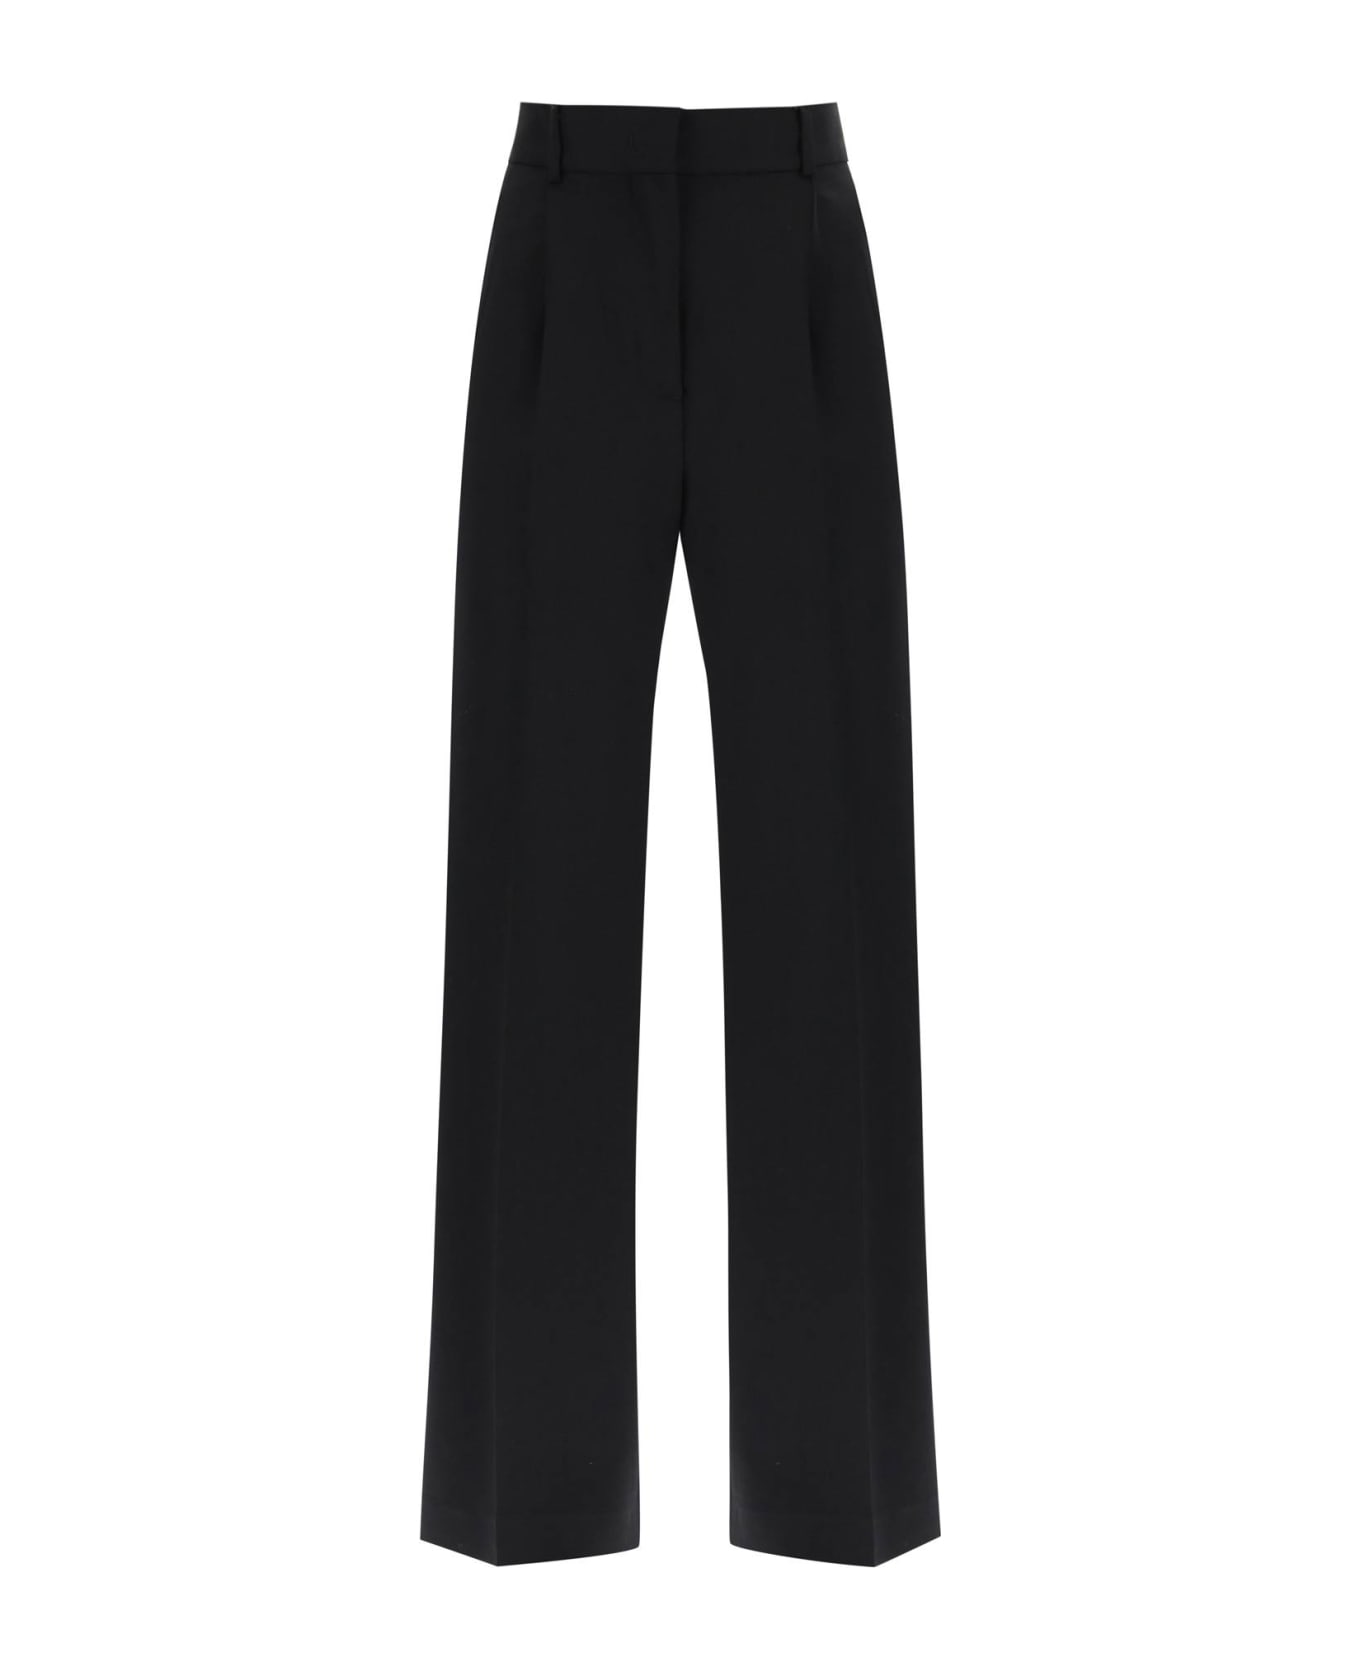 MSGM Tailoring Pants With Wide Leg - NERO (Black)